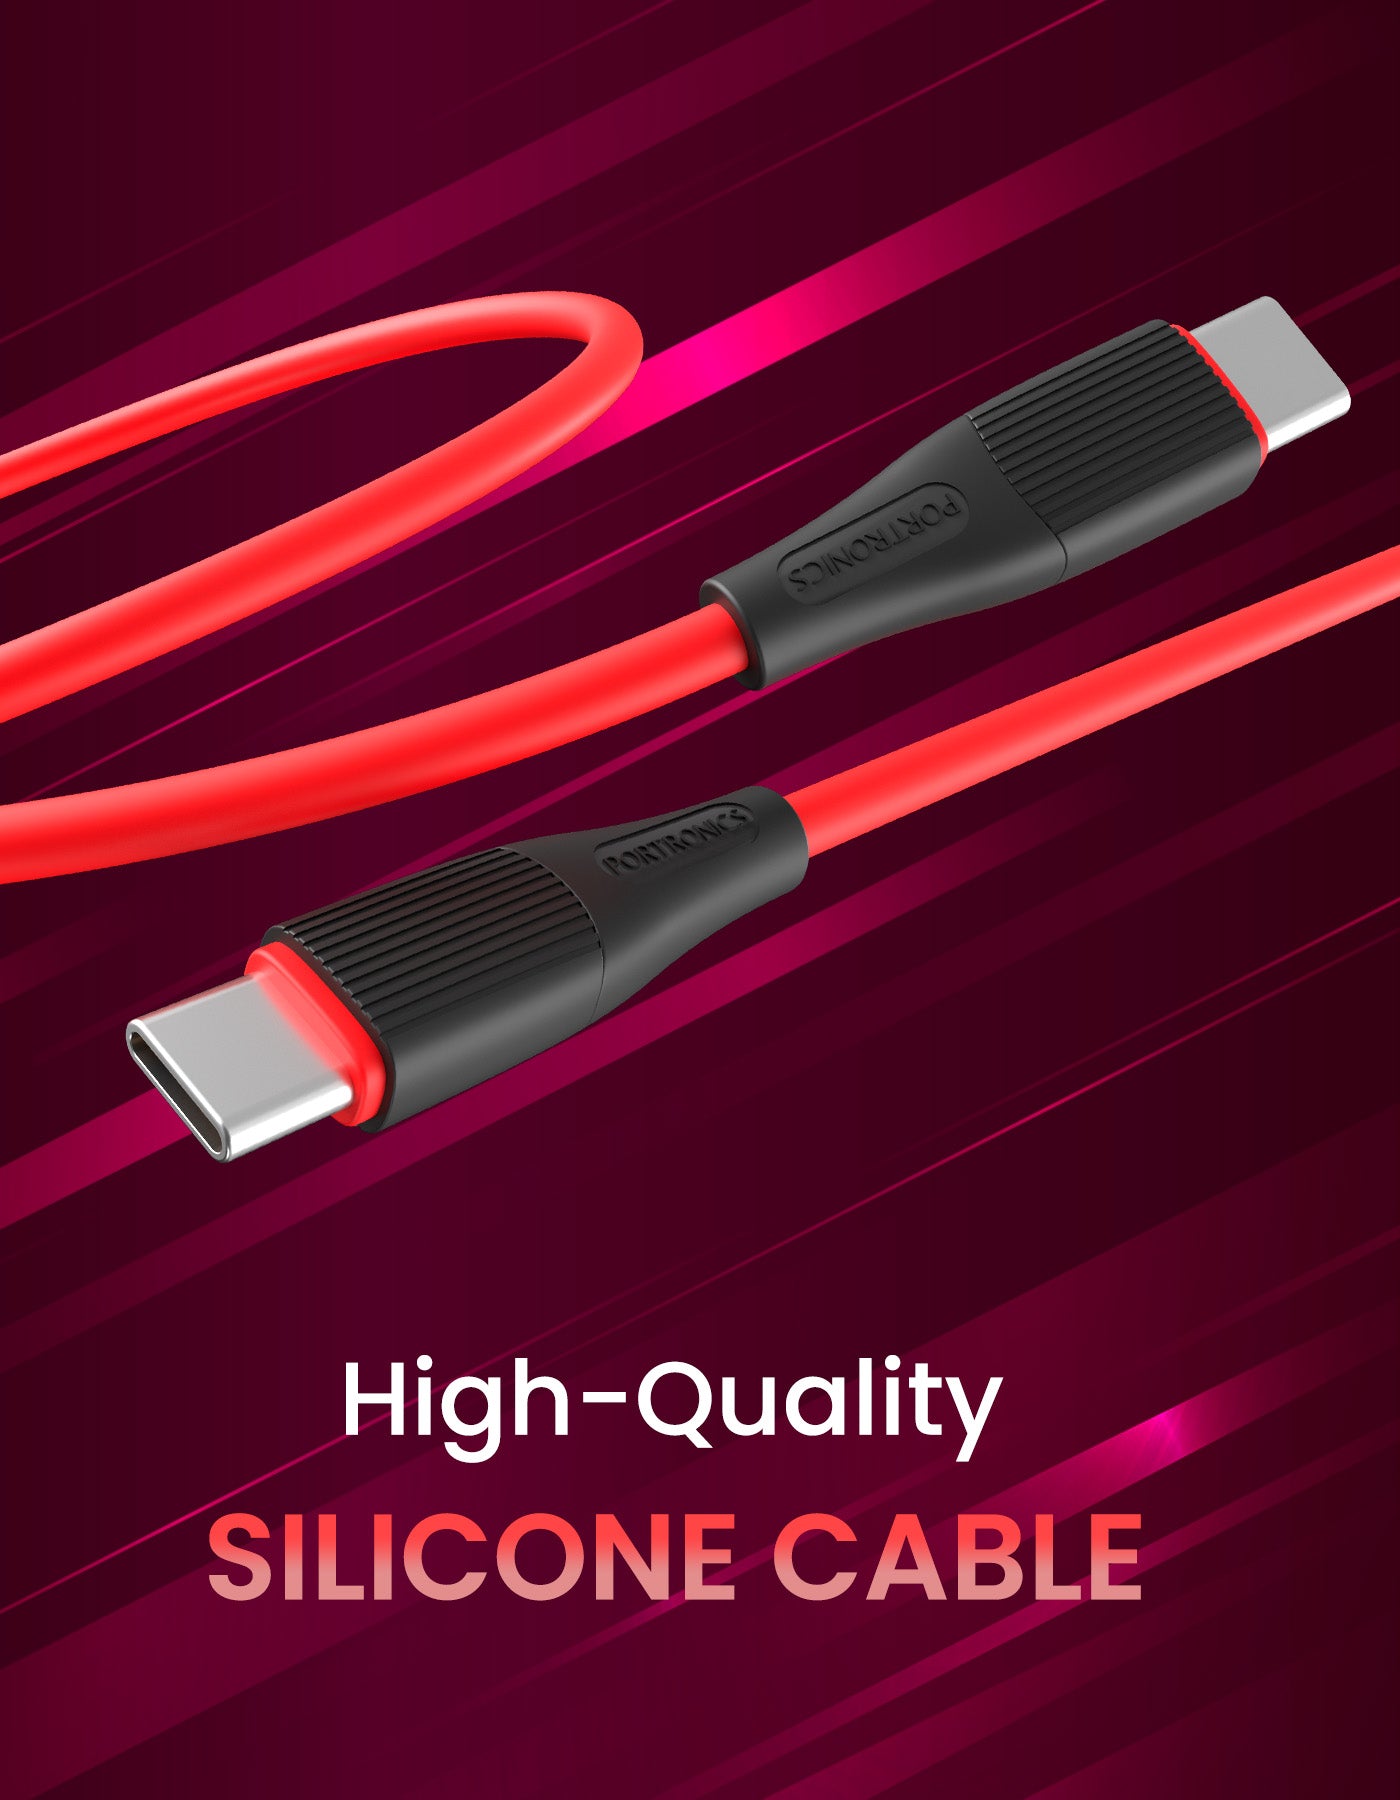 Portronics Konnect Spydr 31 3-in-one cable with micro USB, iOS, & Type C fast charging cable